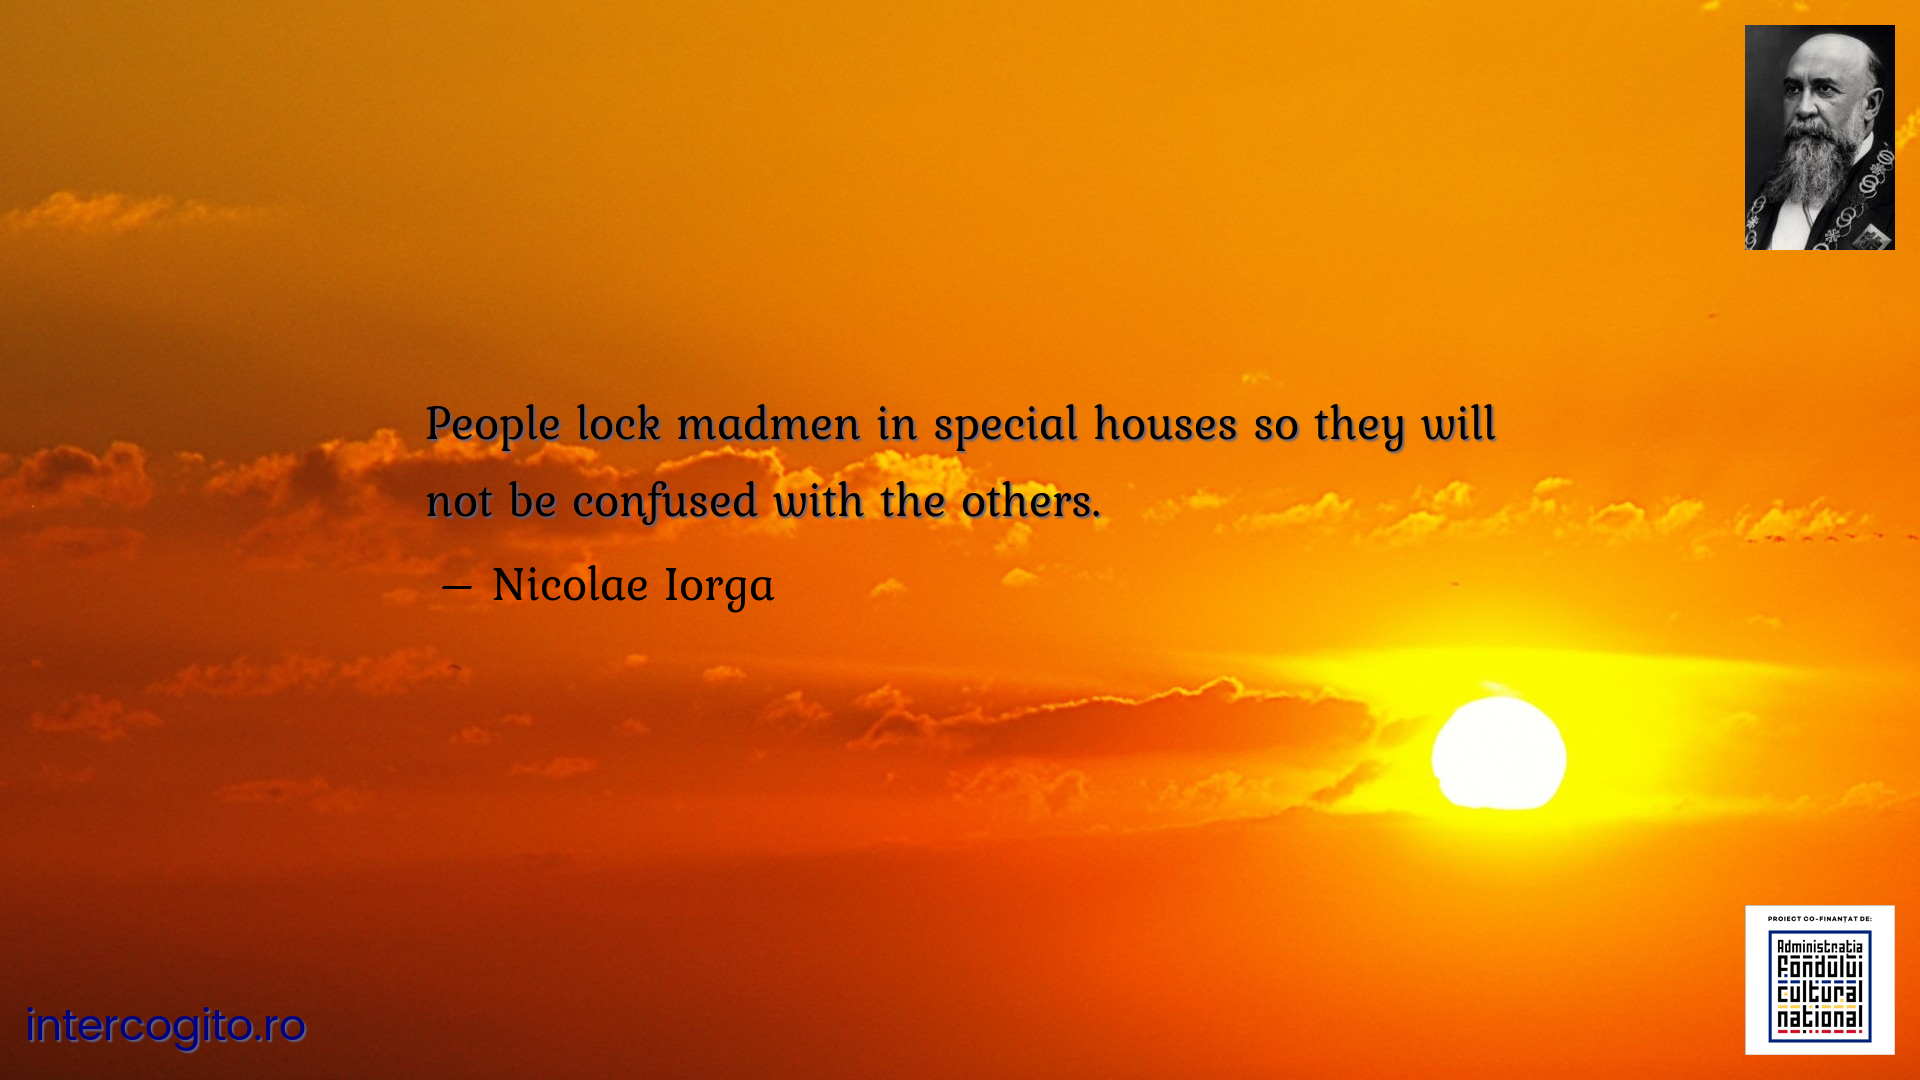 People lock madmen in special houses so they will not be confused with the others.